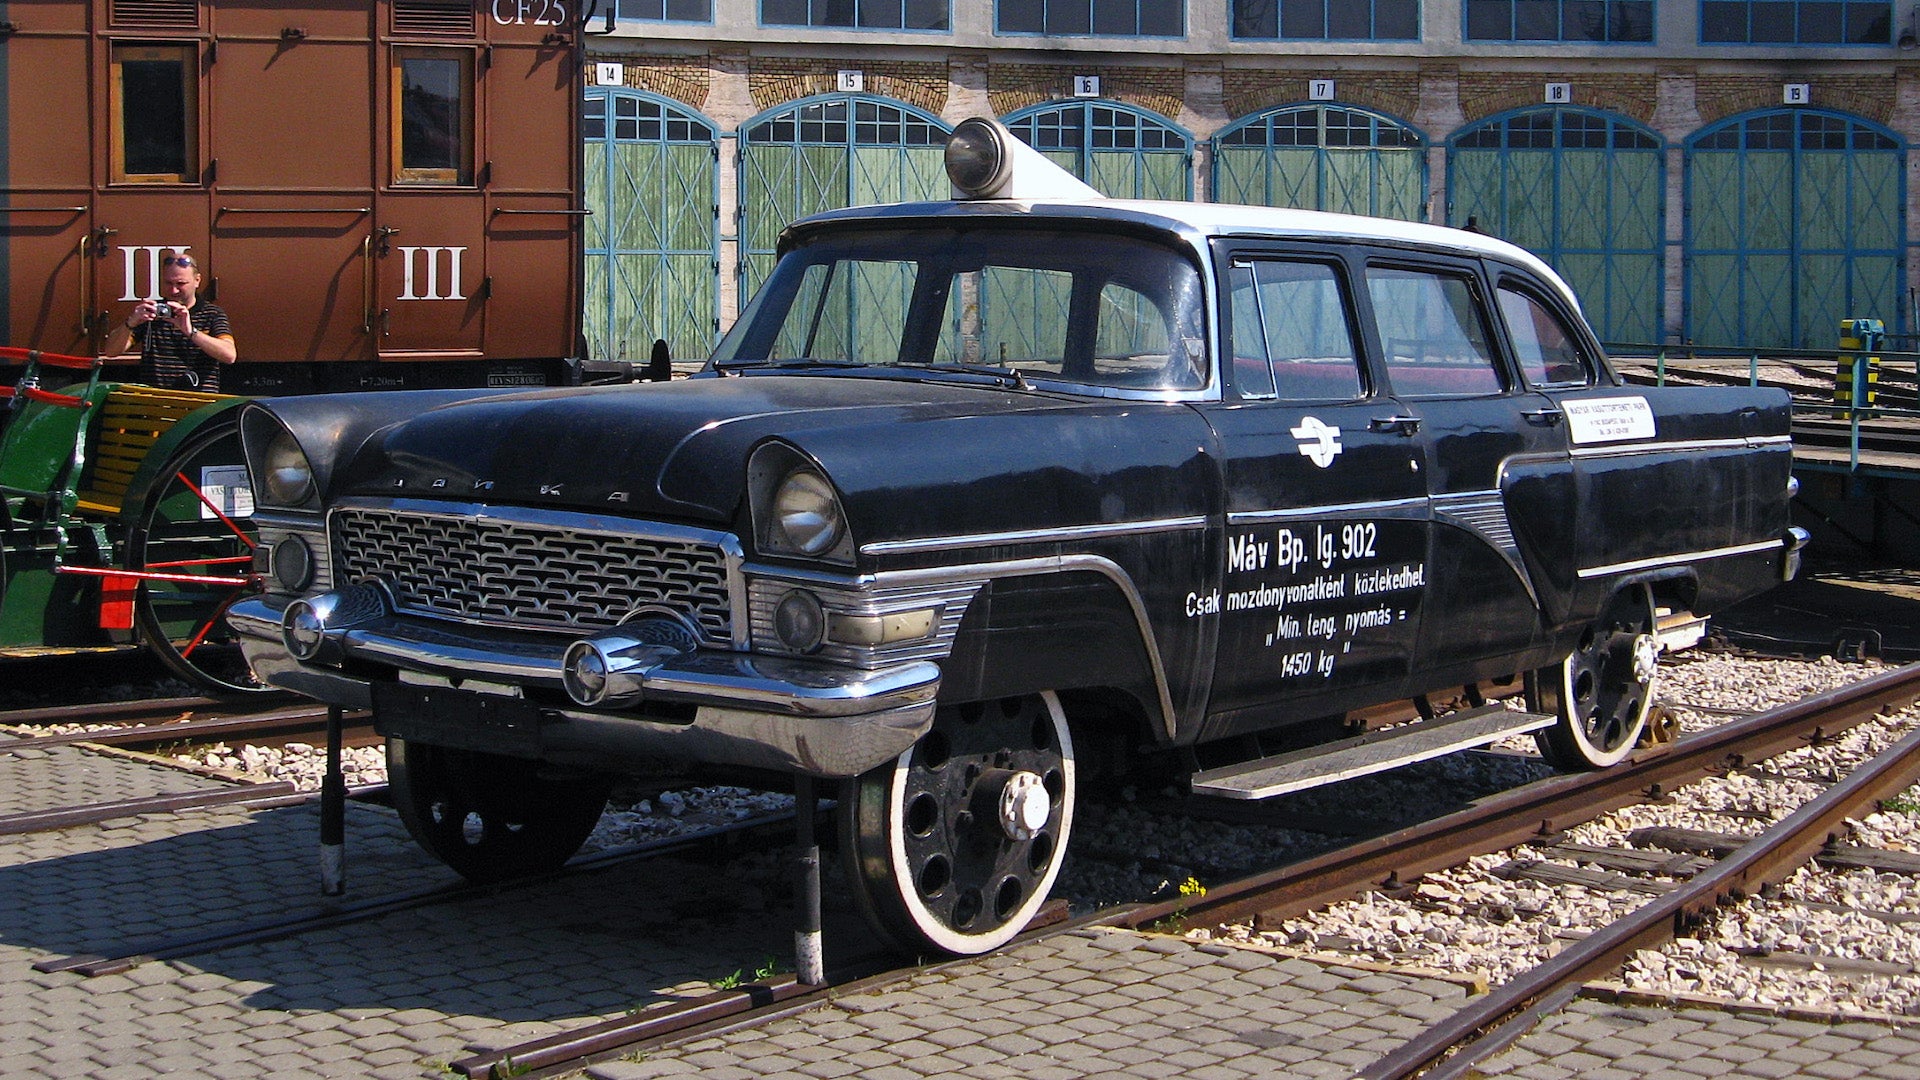 Why the Soviets Built a Knockoff Packard Limo With Train Wheels